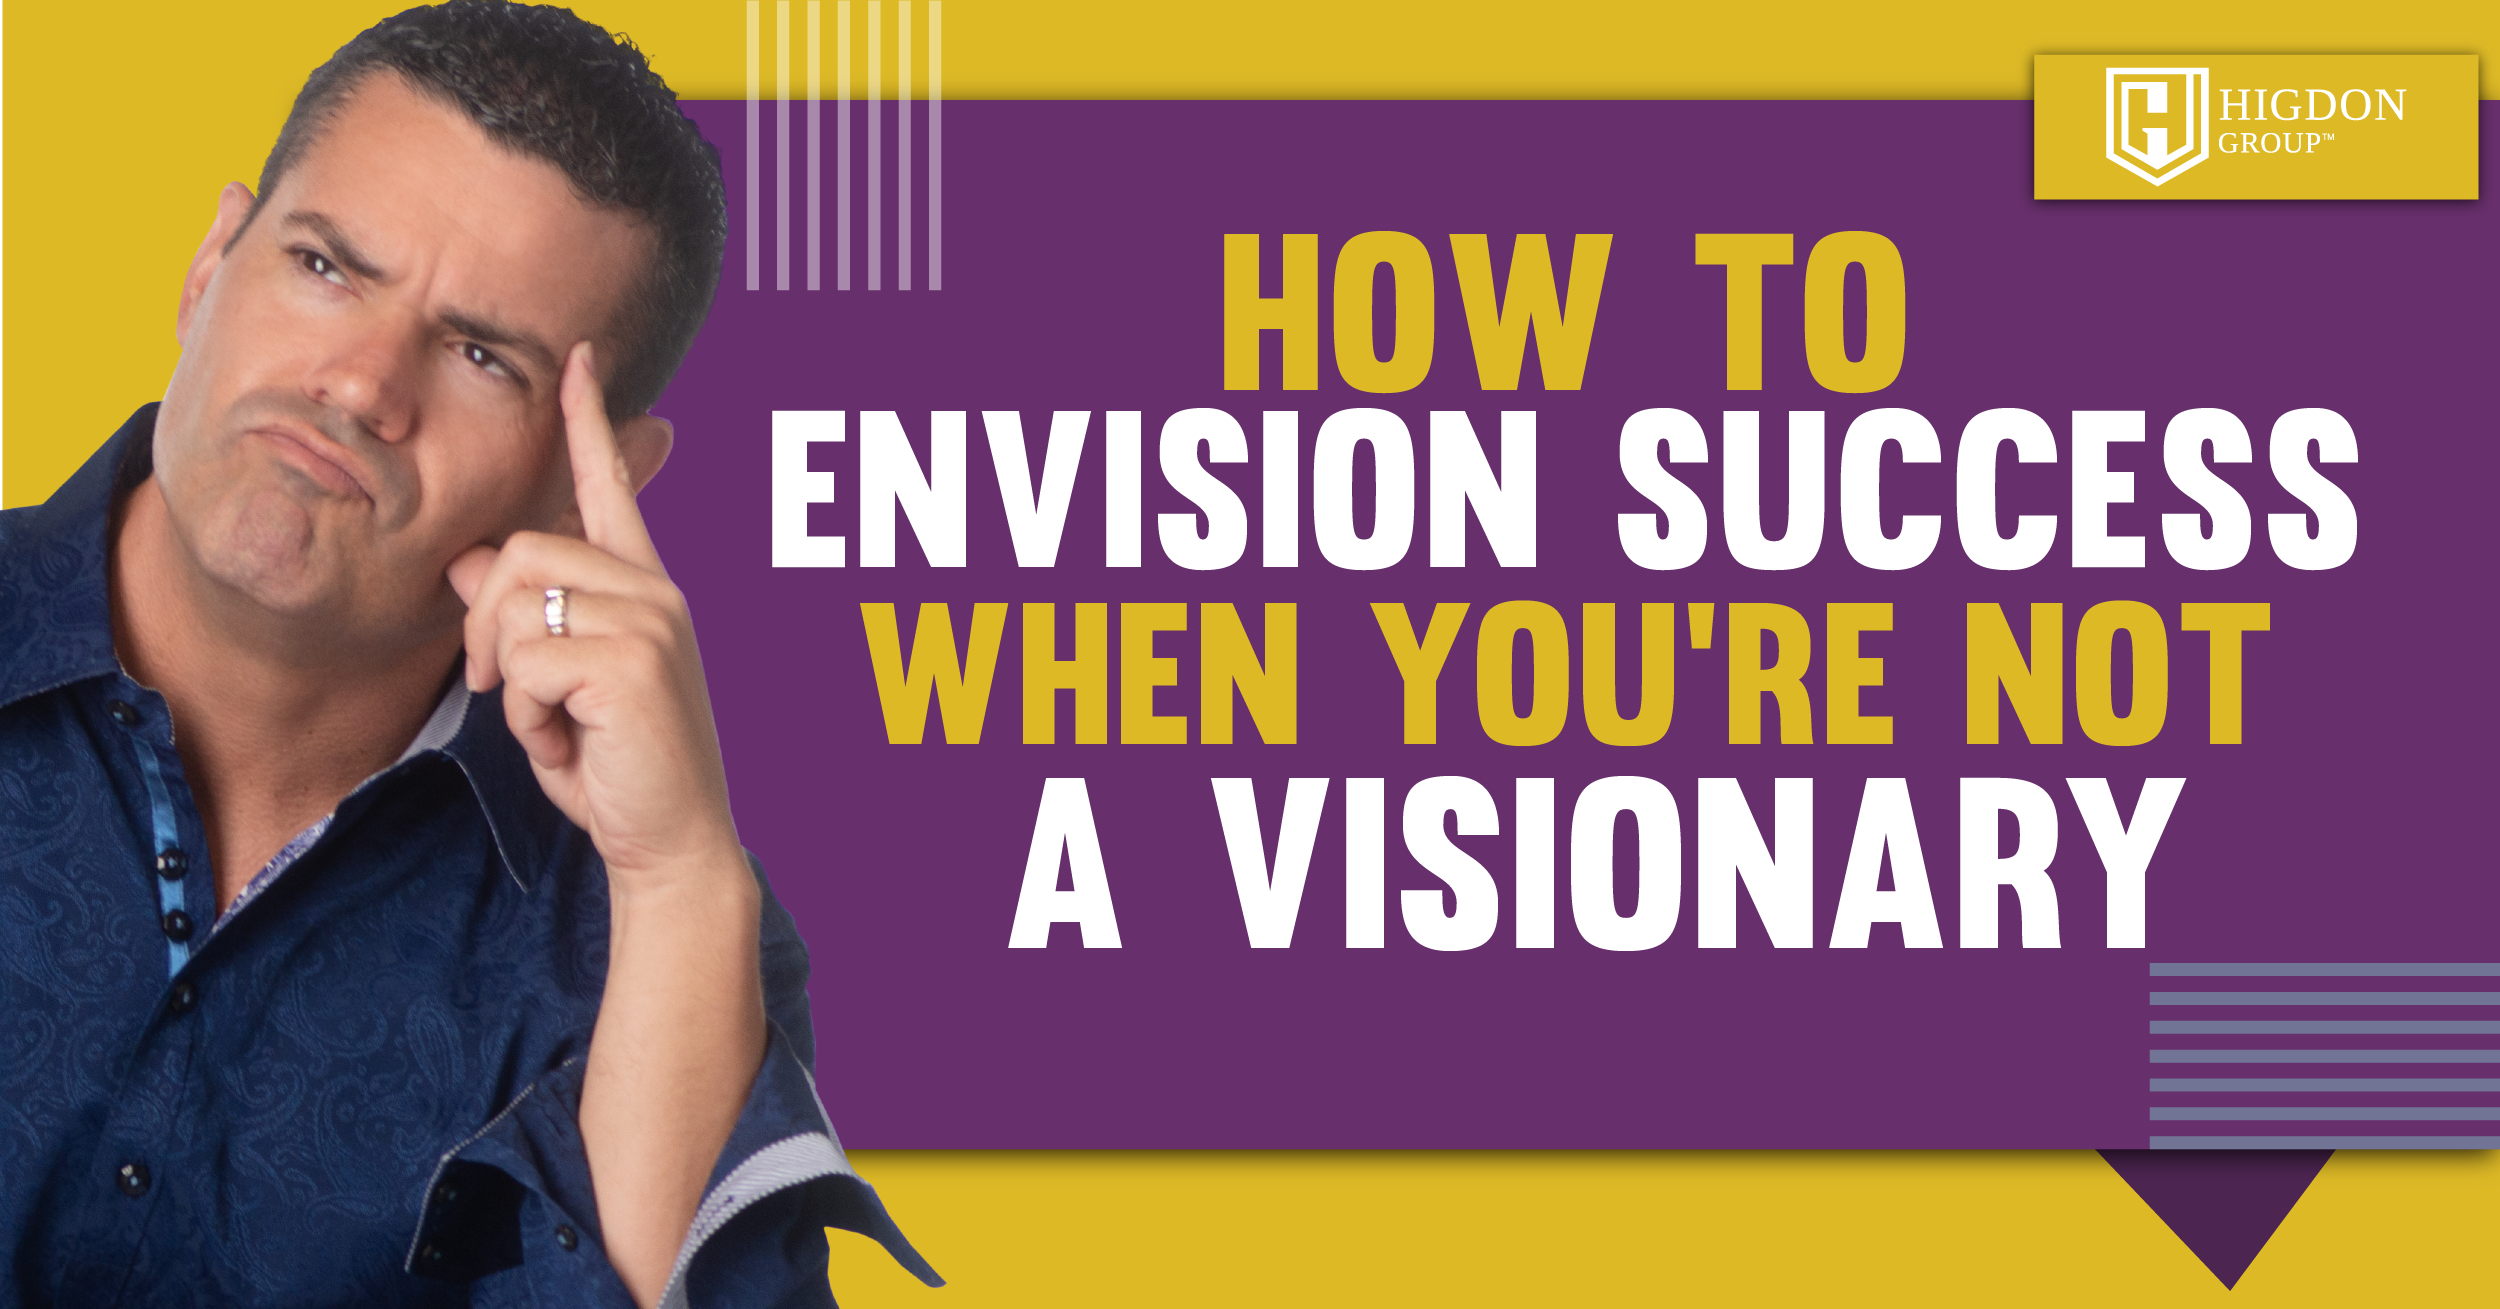 How To Envision Success When You're Not A Visionary